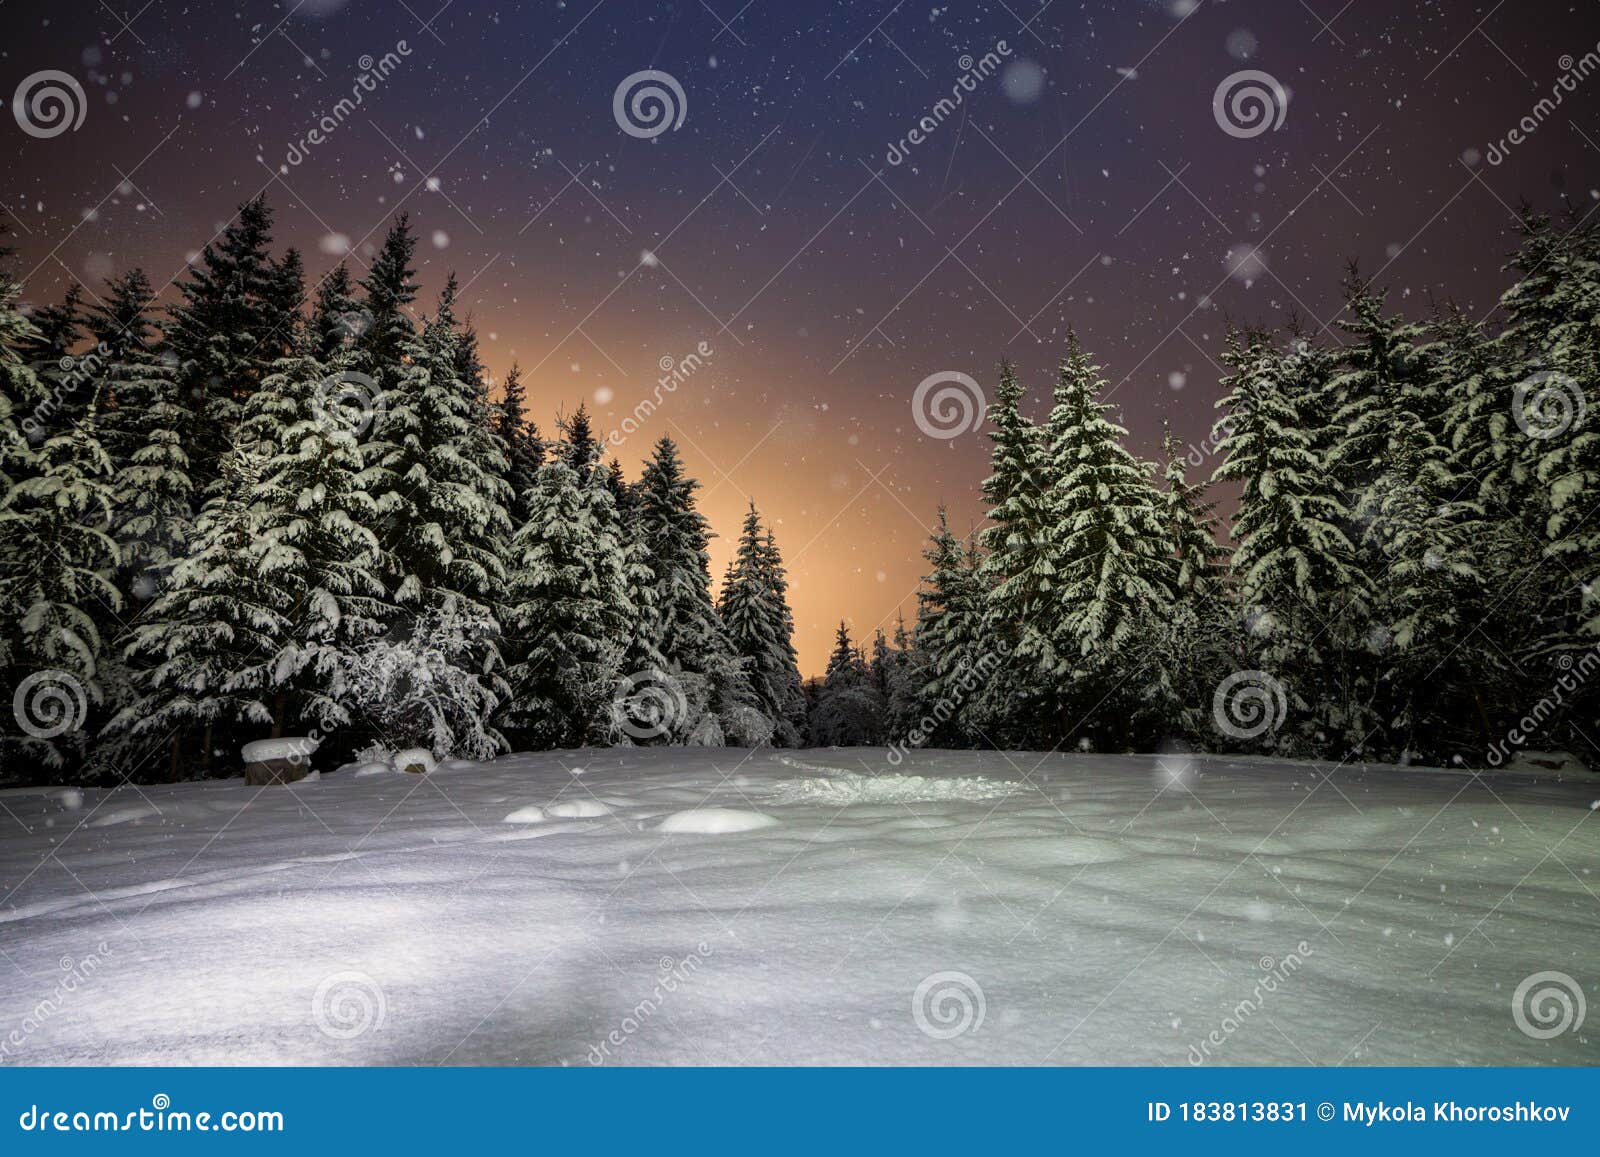 3 453 Winter Forest Night Snowflake Photos Free Royalty Free Stock Photos From Dreamstime